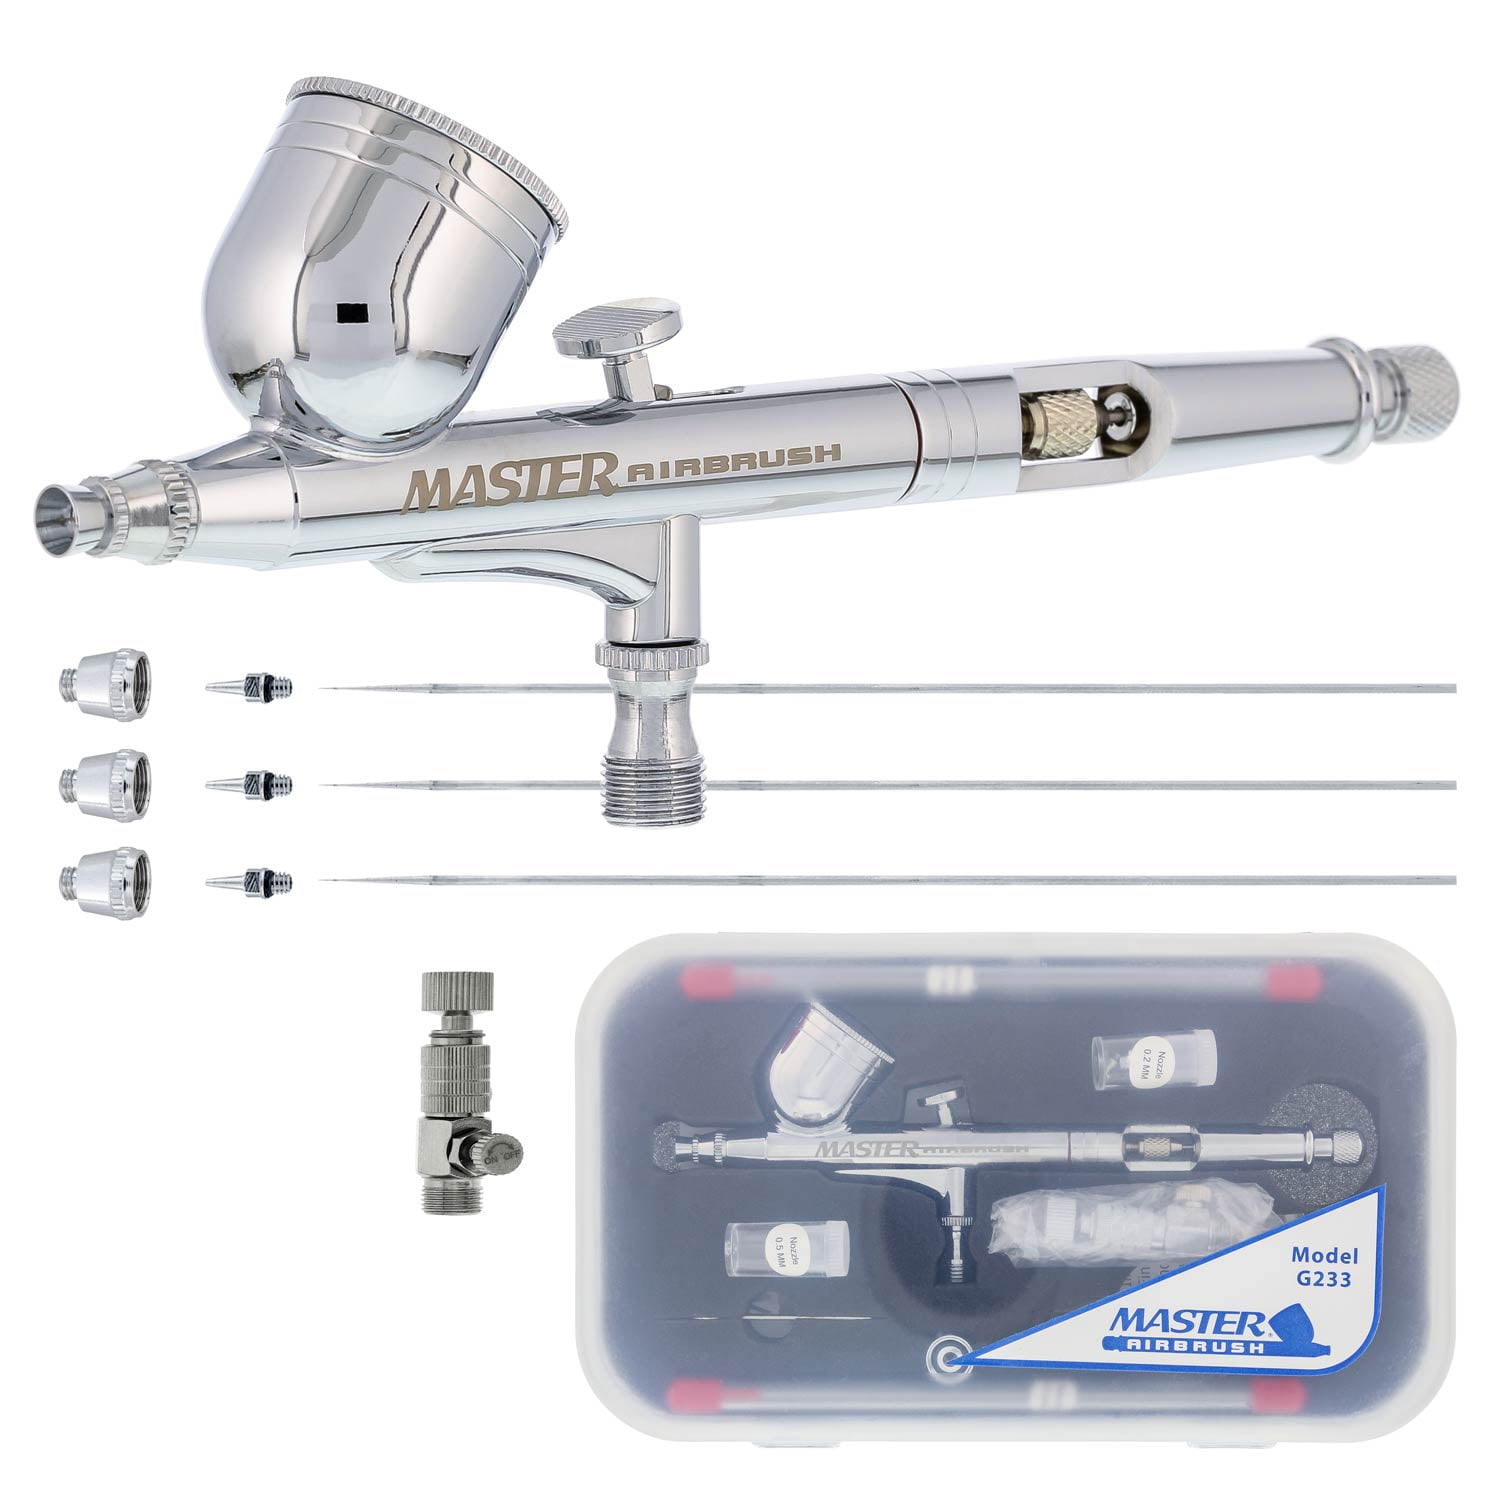 We've found the Best Dual-Action Gravity Feed Airbrush Kit